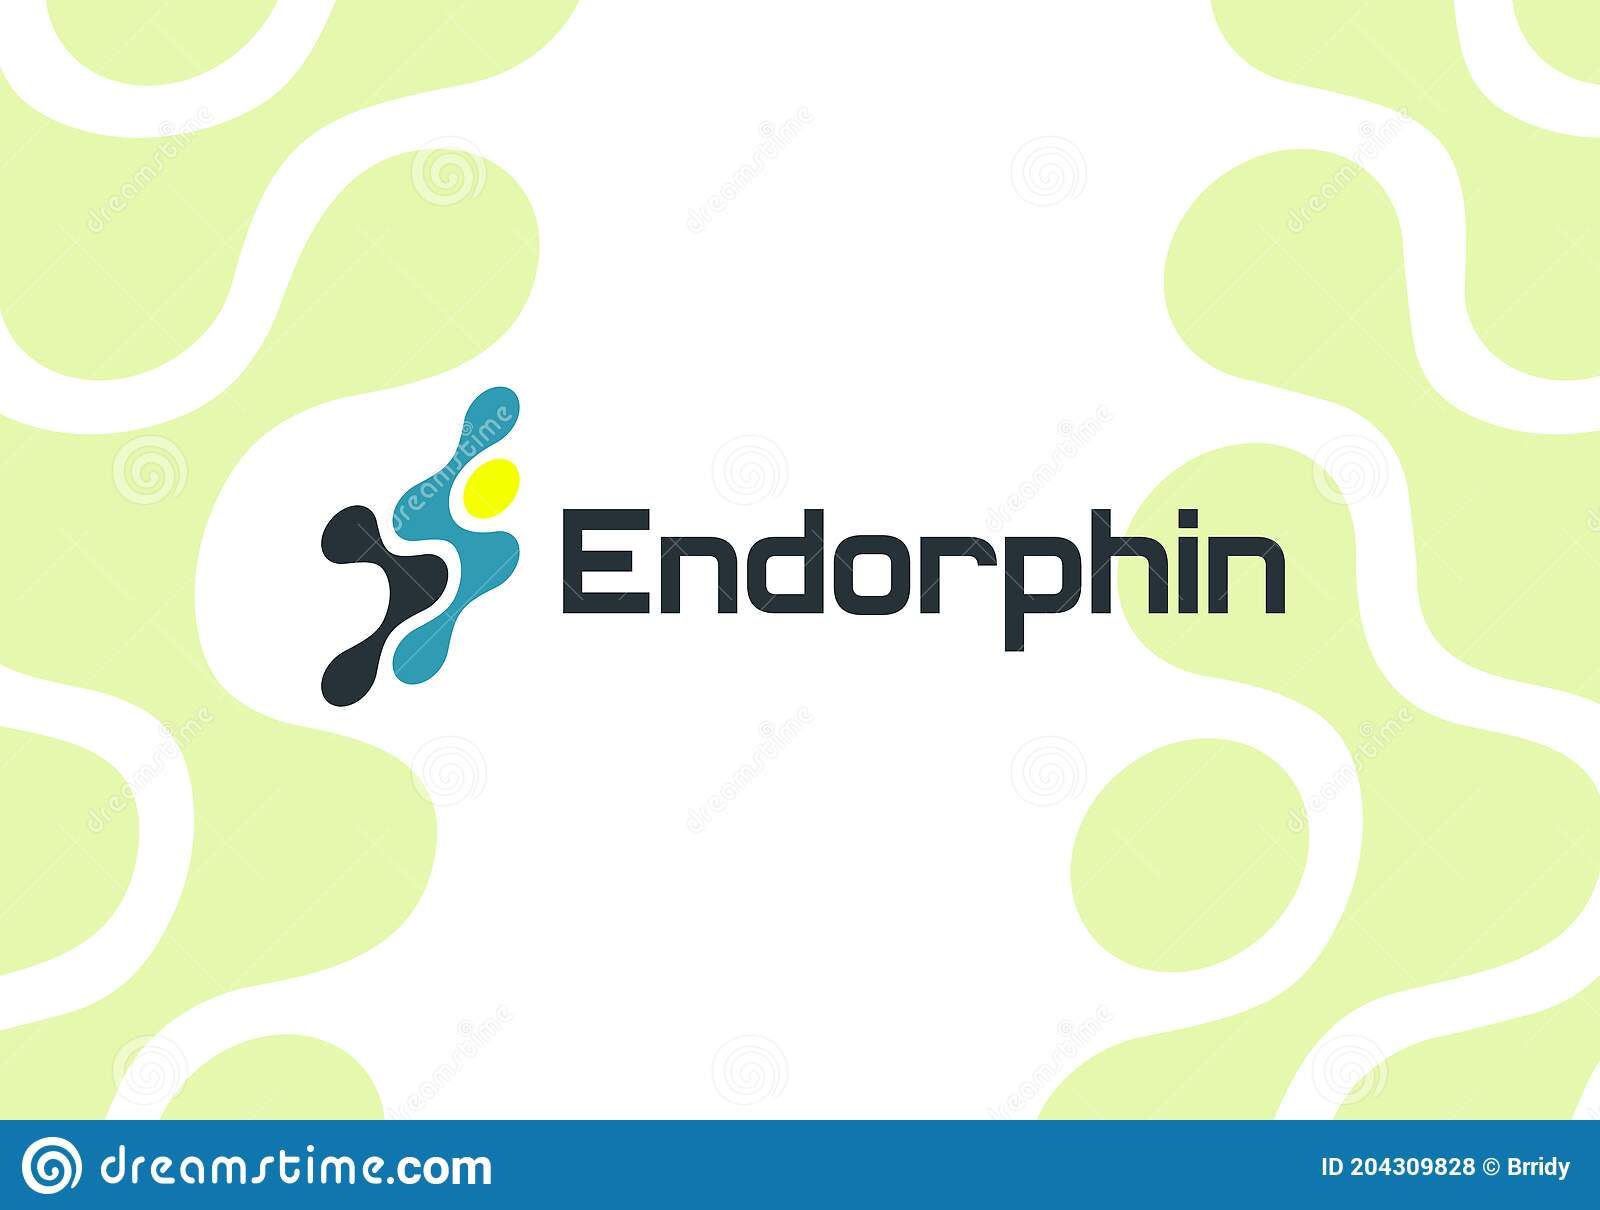 endorphin software download